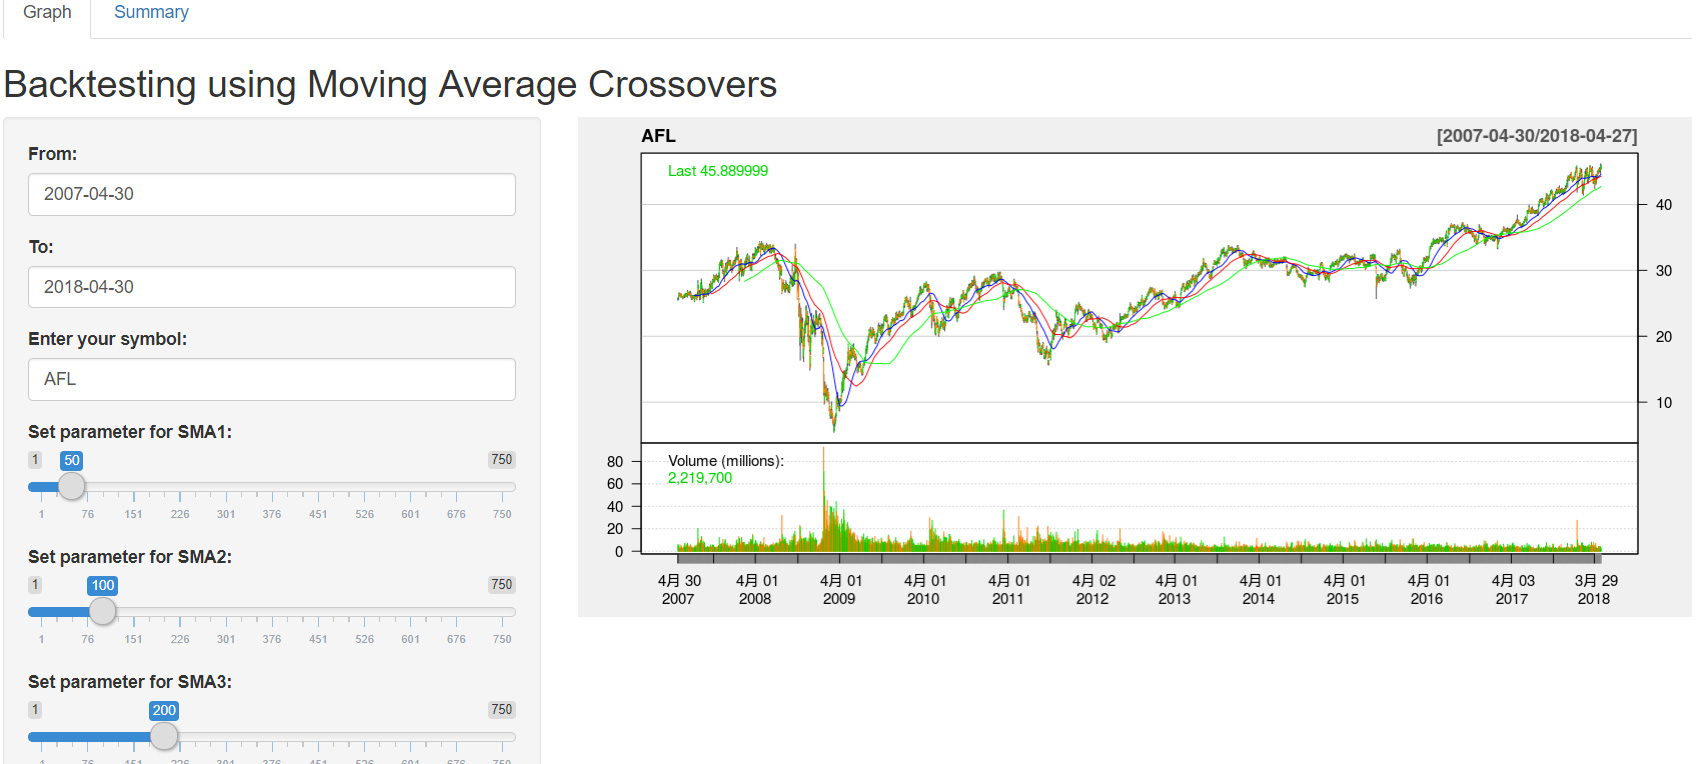 Backtesting using Moving Average Crossovers